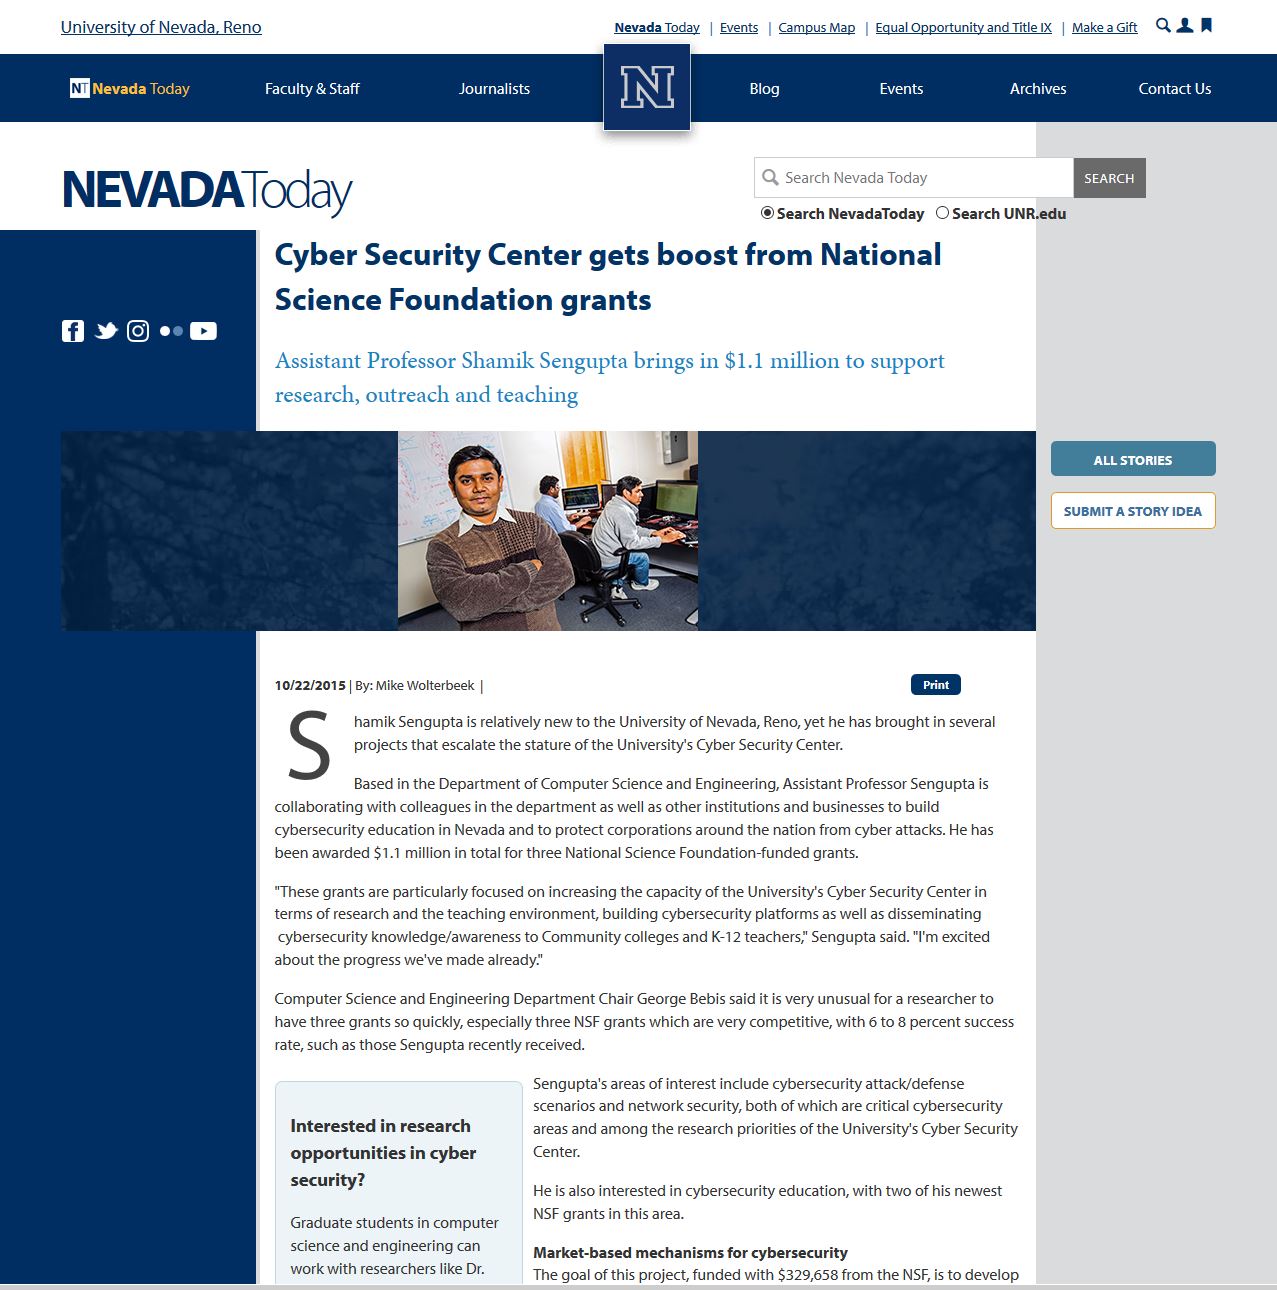 Read More about Cyber Security Center Gets Boost